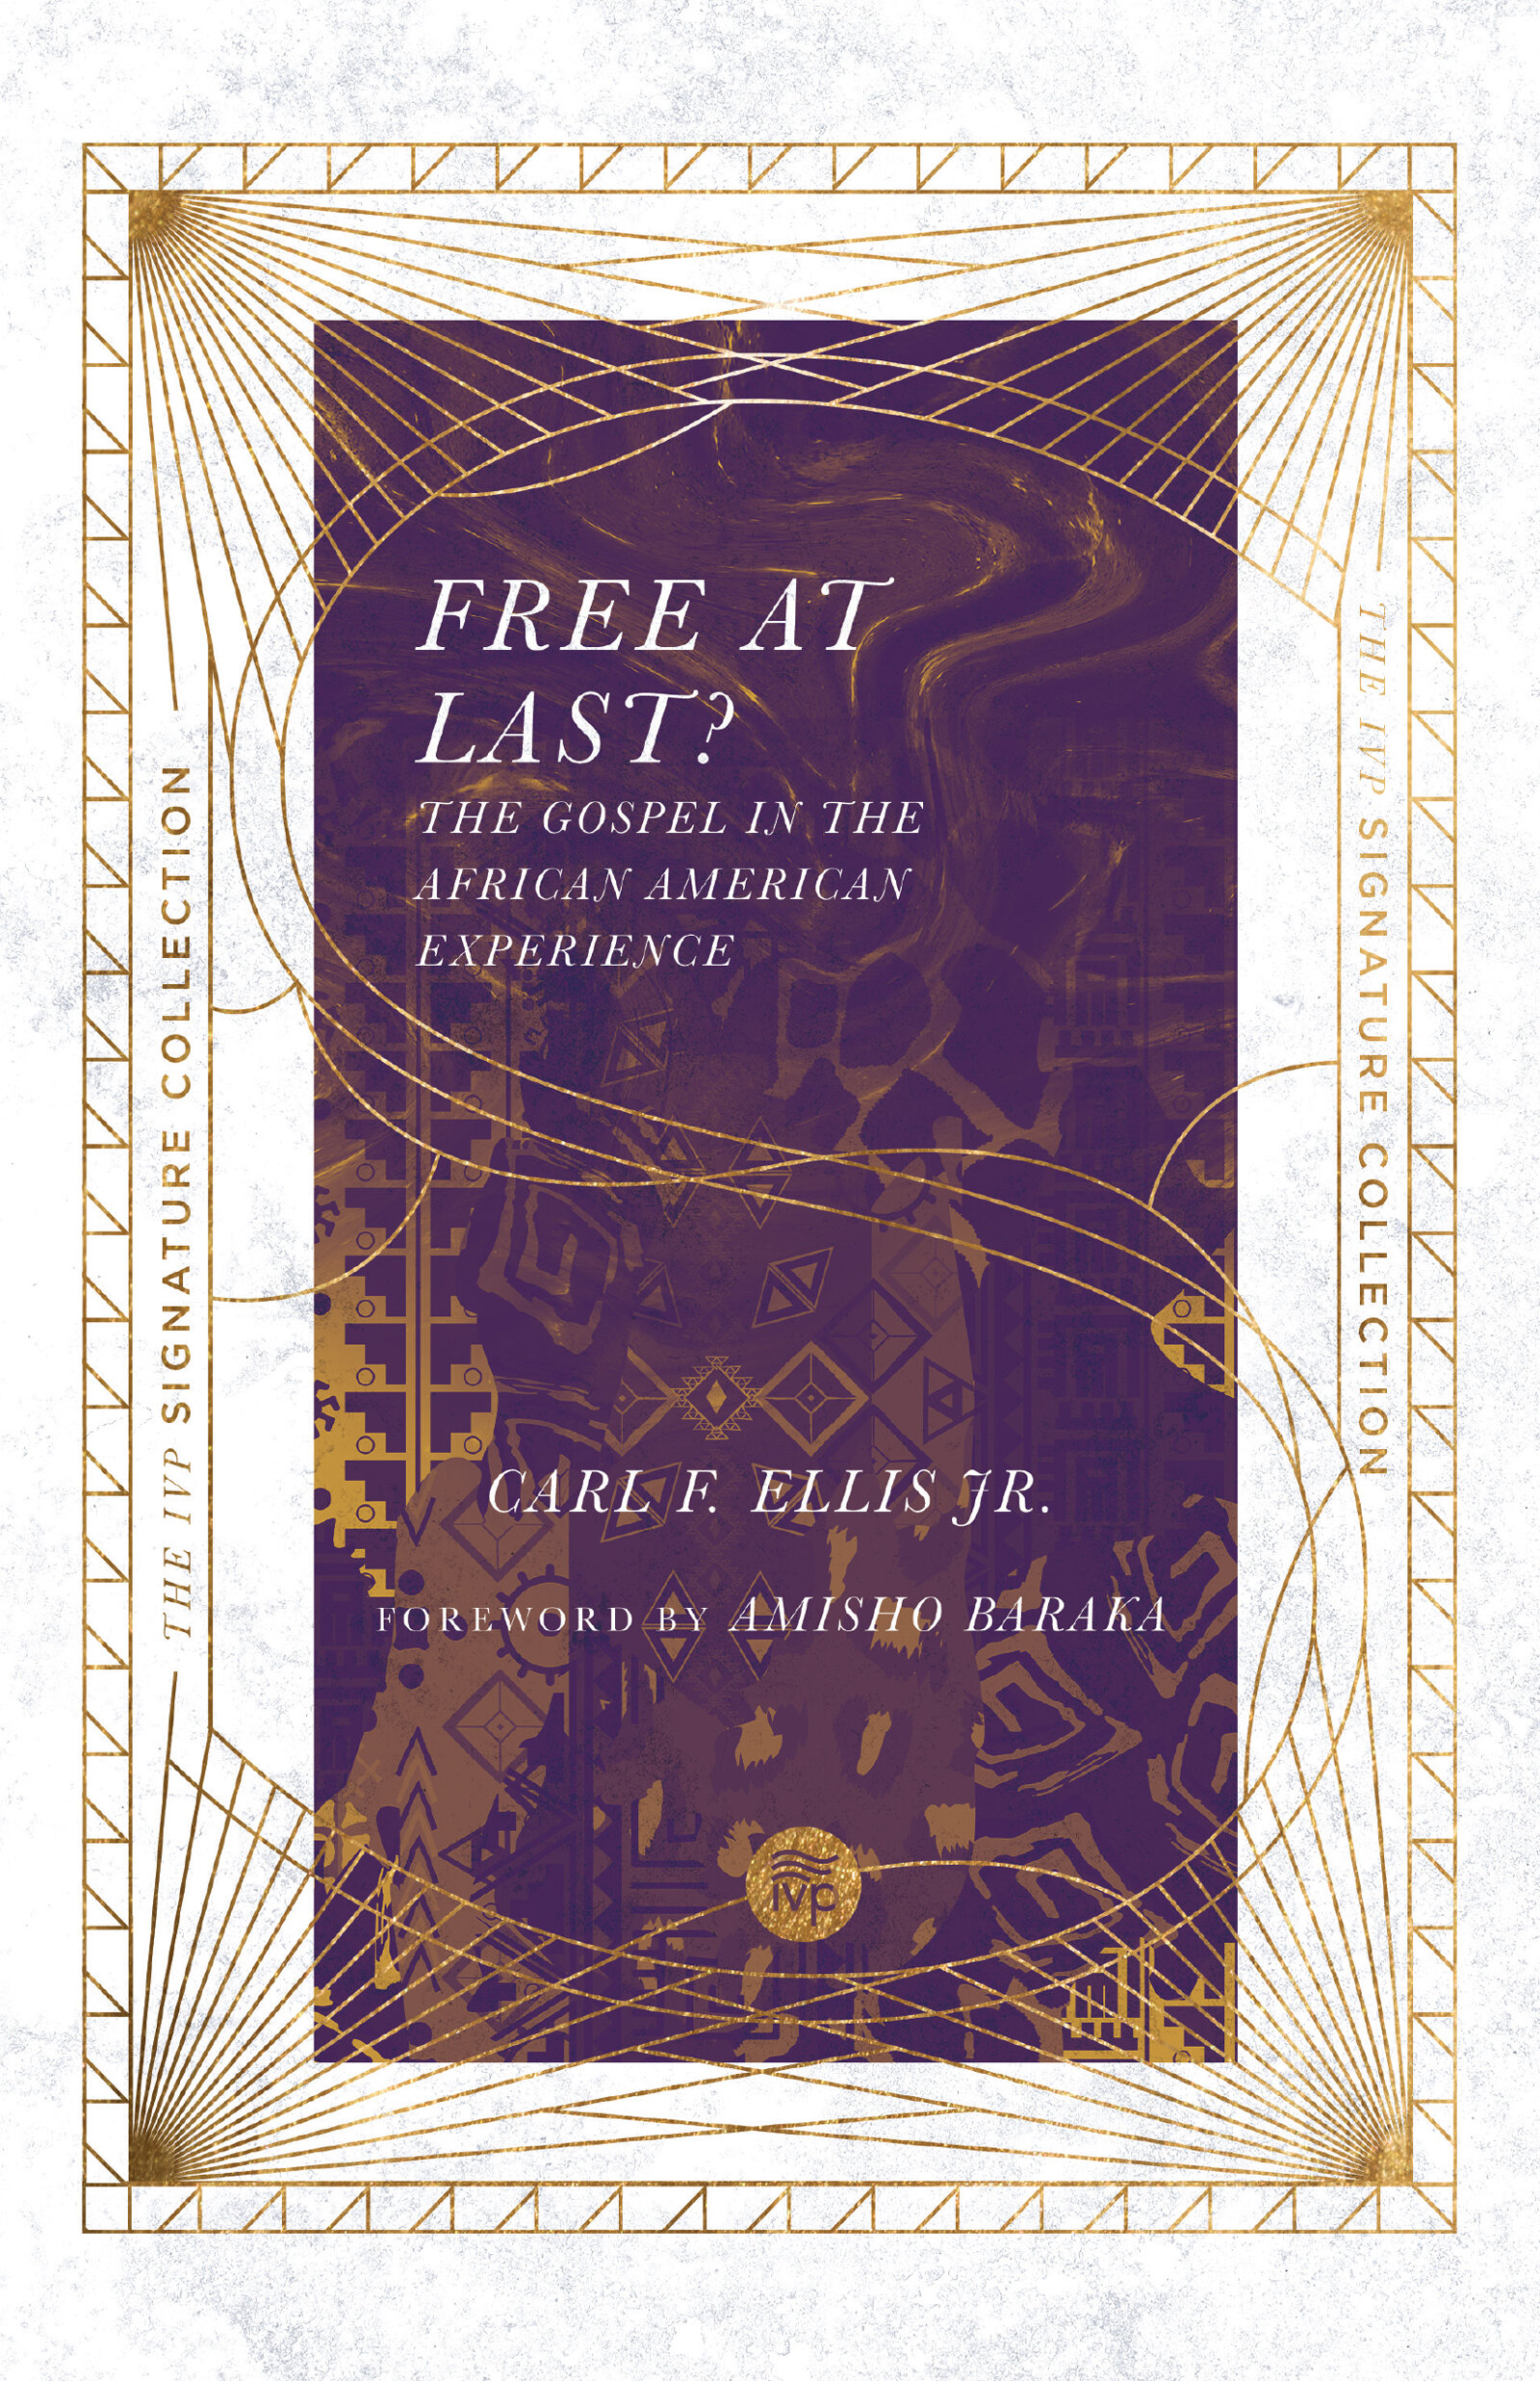 Free at Last? The Gospel in the African American Experience